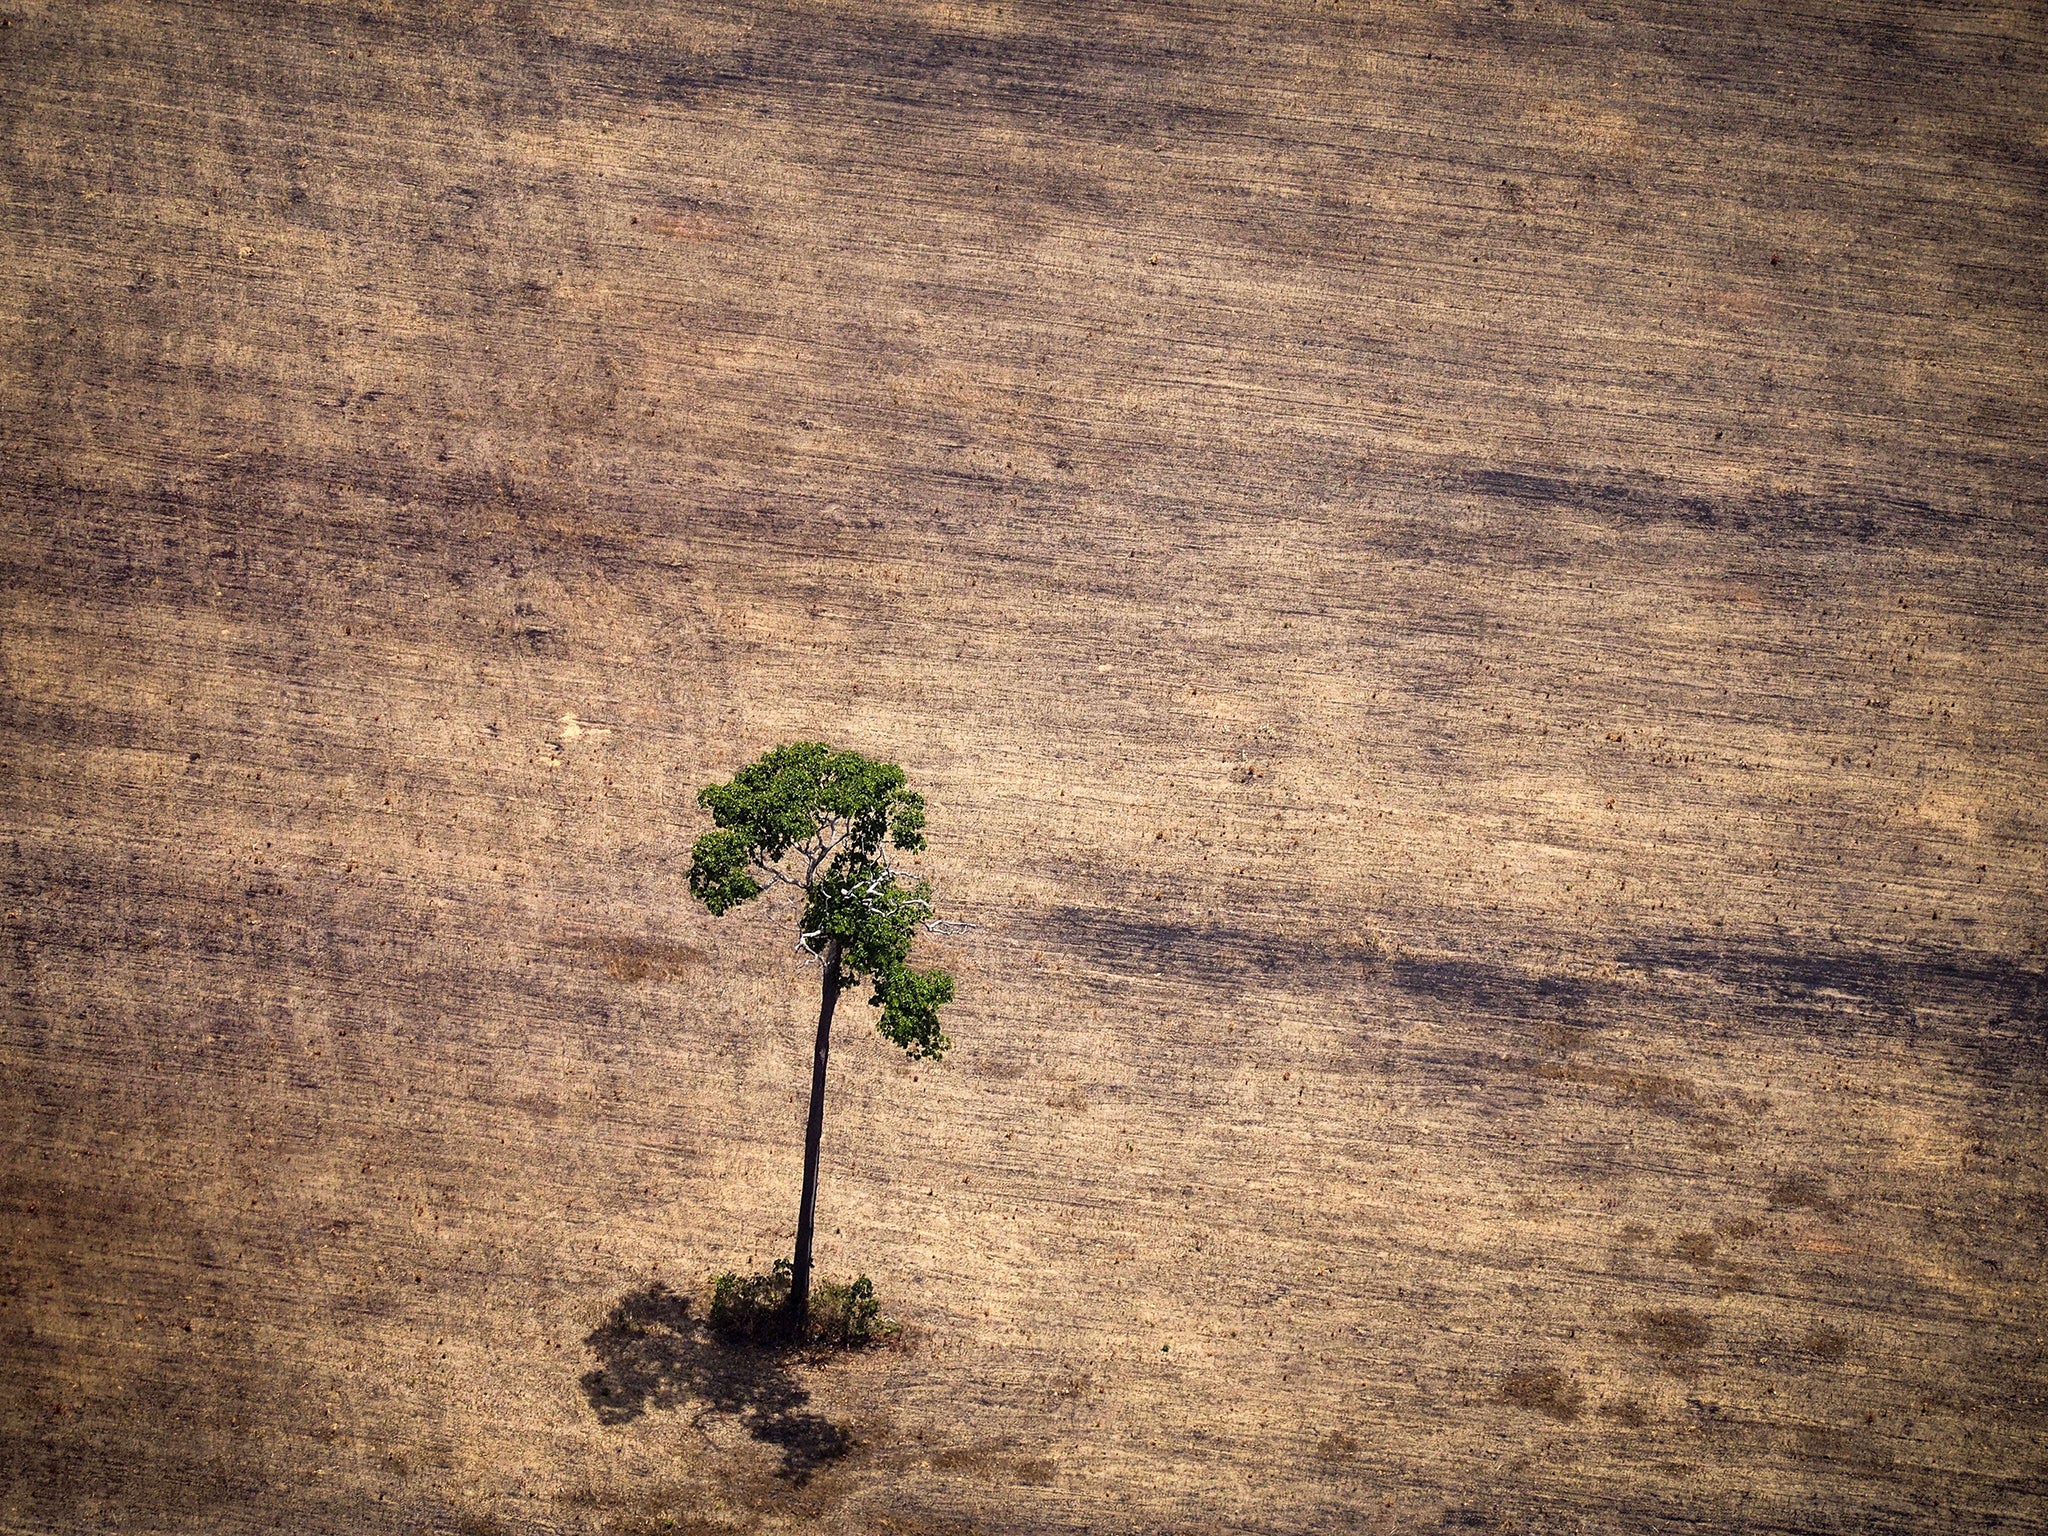 Deforestation and land degradation is the second biggest source of emissions, says Lord Goldsmith